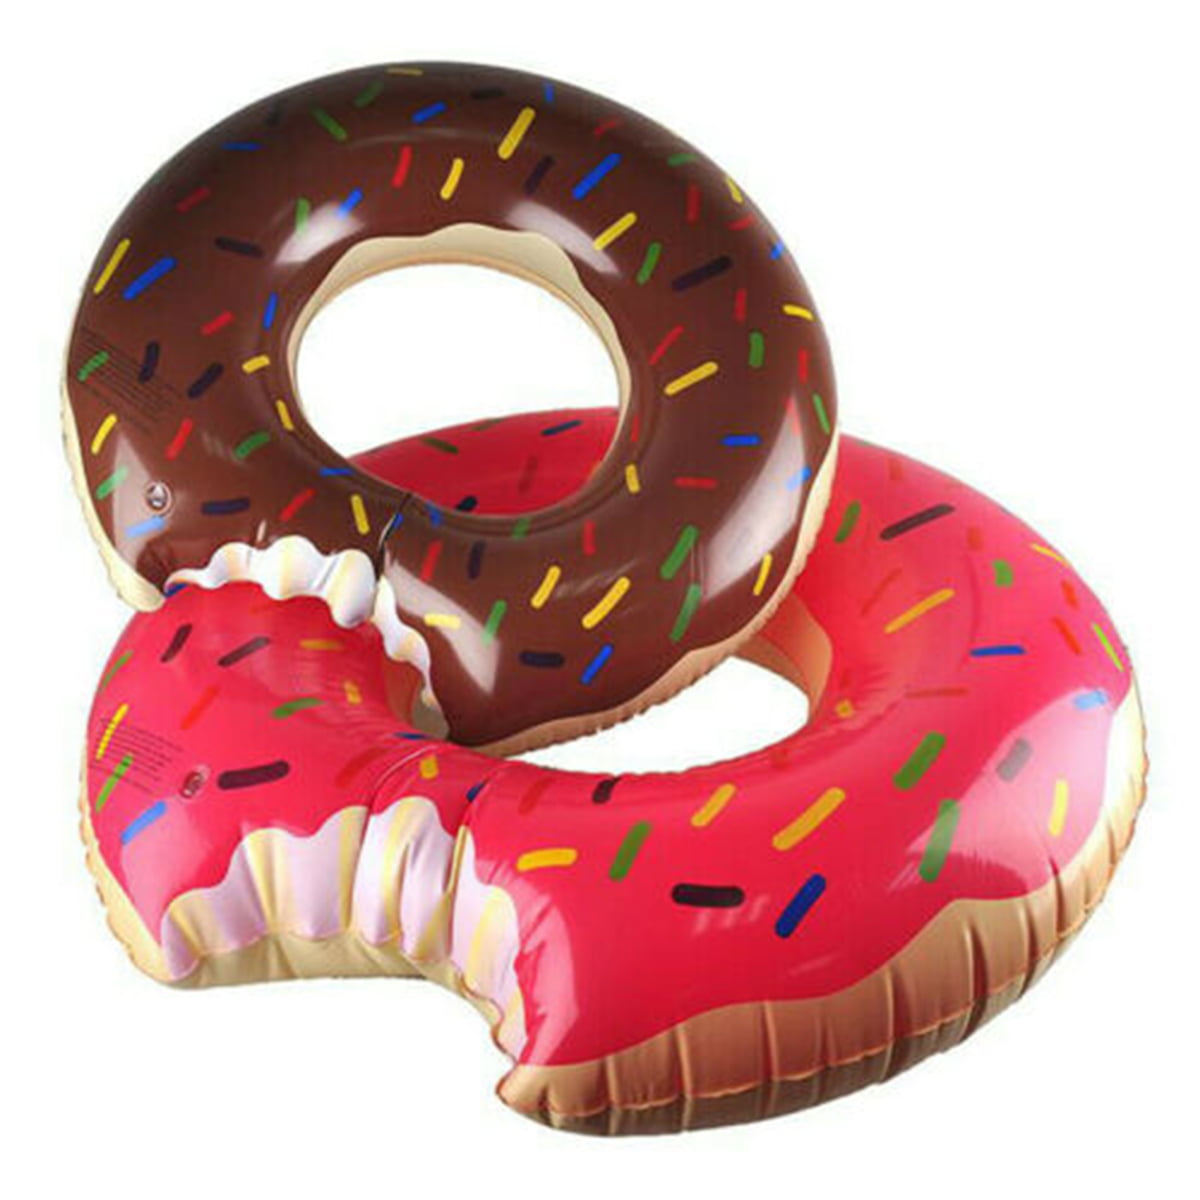 Kids Inflatable Rubber Donut 76cm Rings Pool Beach Ride On Float Summer Toy Fun 